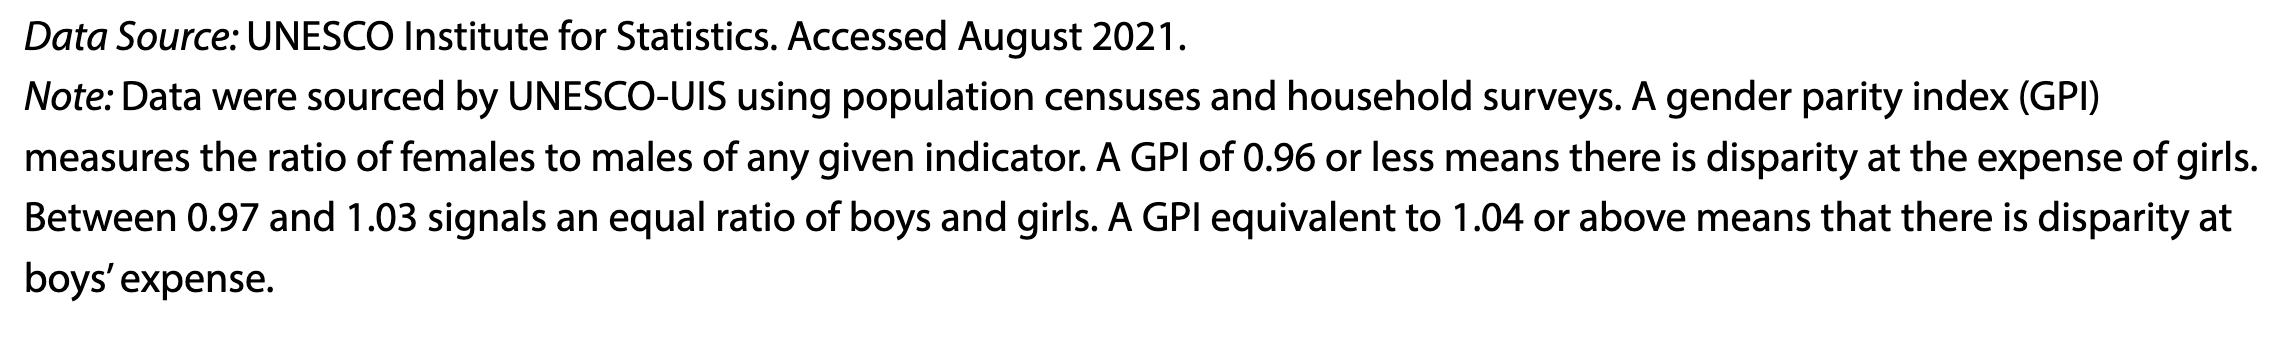 Figure 5: Gender parity index (adjusted) for completion rates at secondary level (Source: UNESCO report, Page 36)